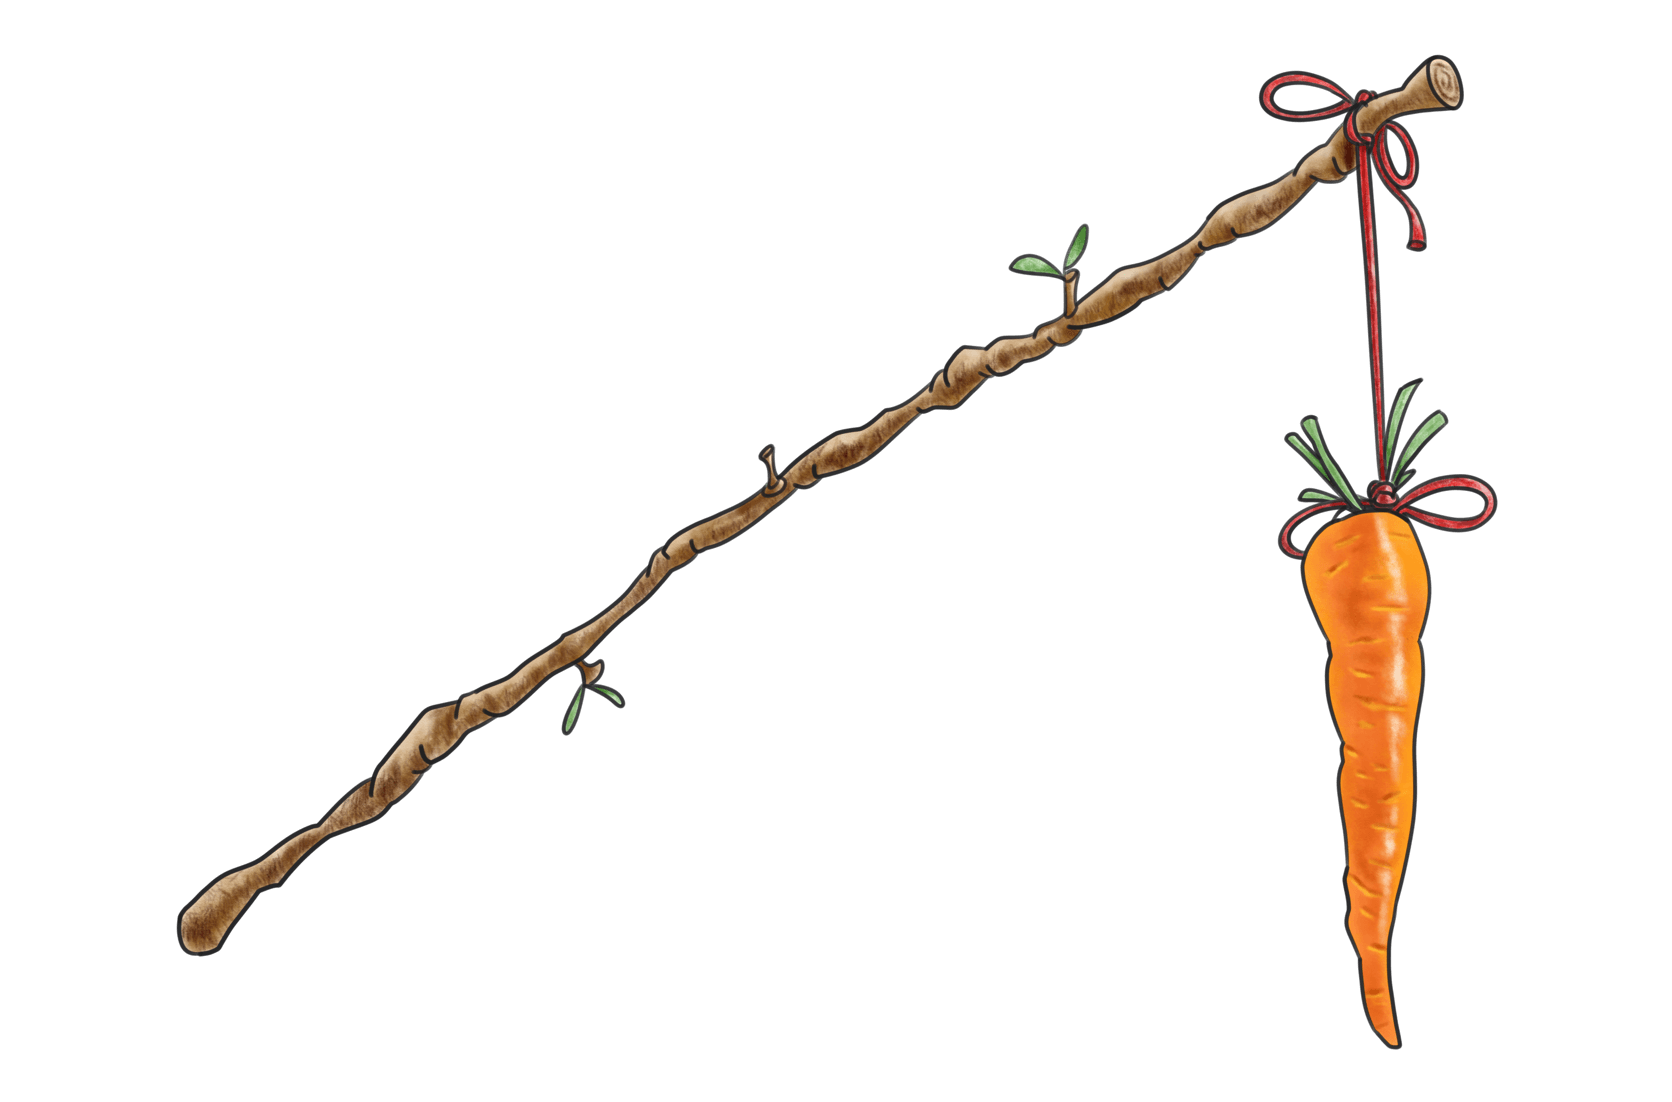 carrot-on-stick@2x.png